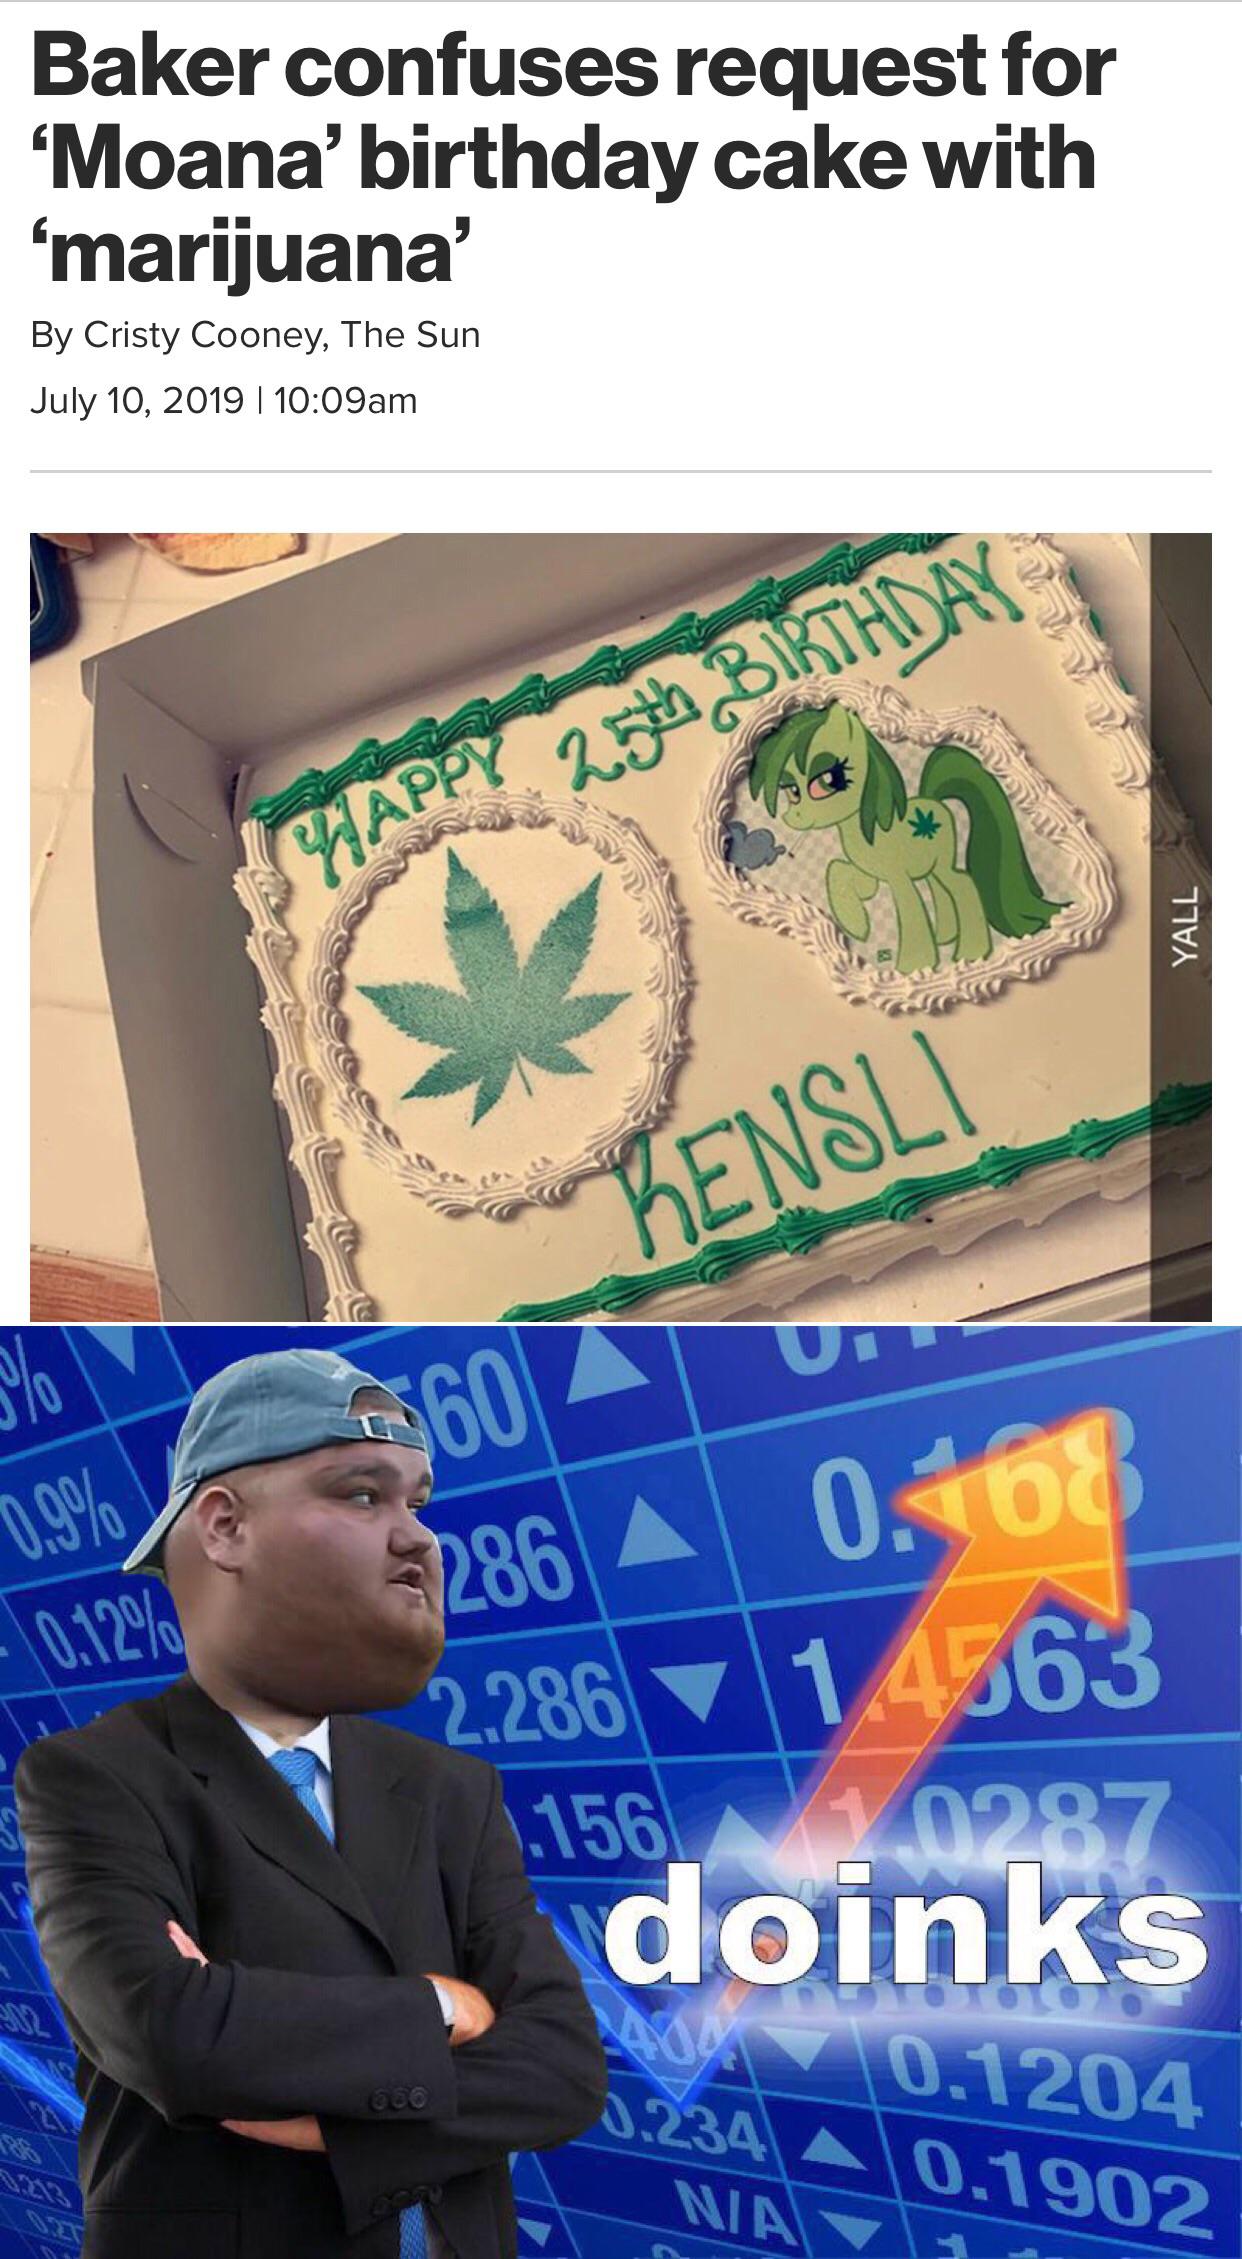 weed meme- poster - Baker confuses request for Moana' birthday cake with 'marijuana' By Cristy Cooney, The Sun | am Happy 25 Birthday Yall Kensli 0.168 3286 A 0.12% 2.286 1.4663 .156 0297 doinks 10.1204 A 0.1902 Na